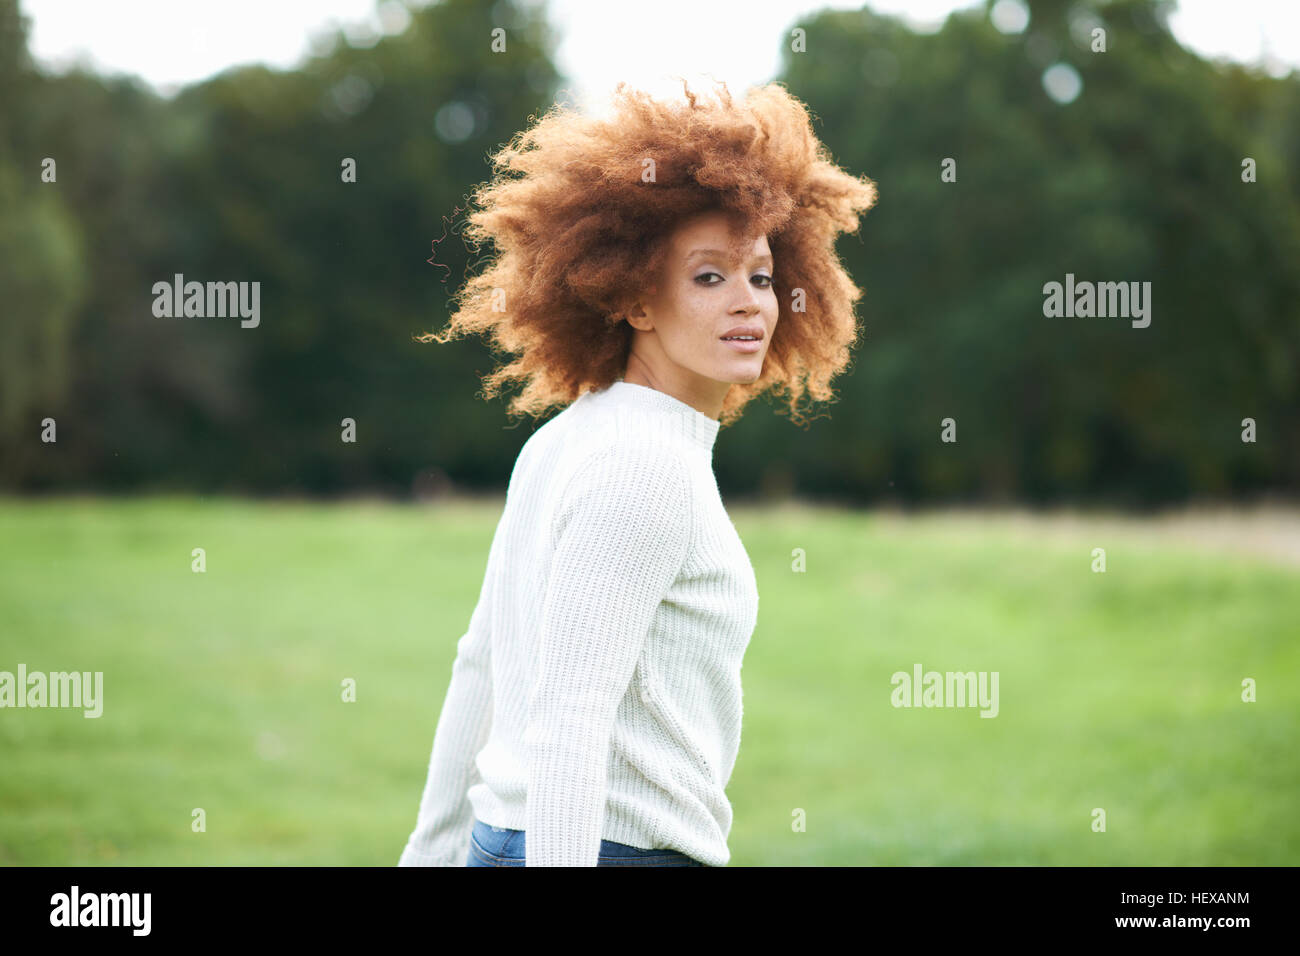 Portrait de curly haired woman looking over Shoulder at camera Banque D'Images